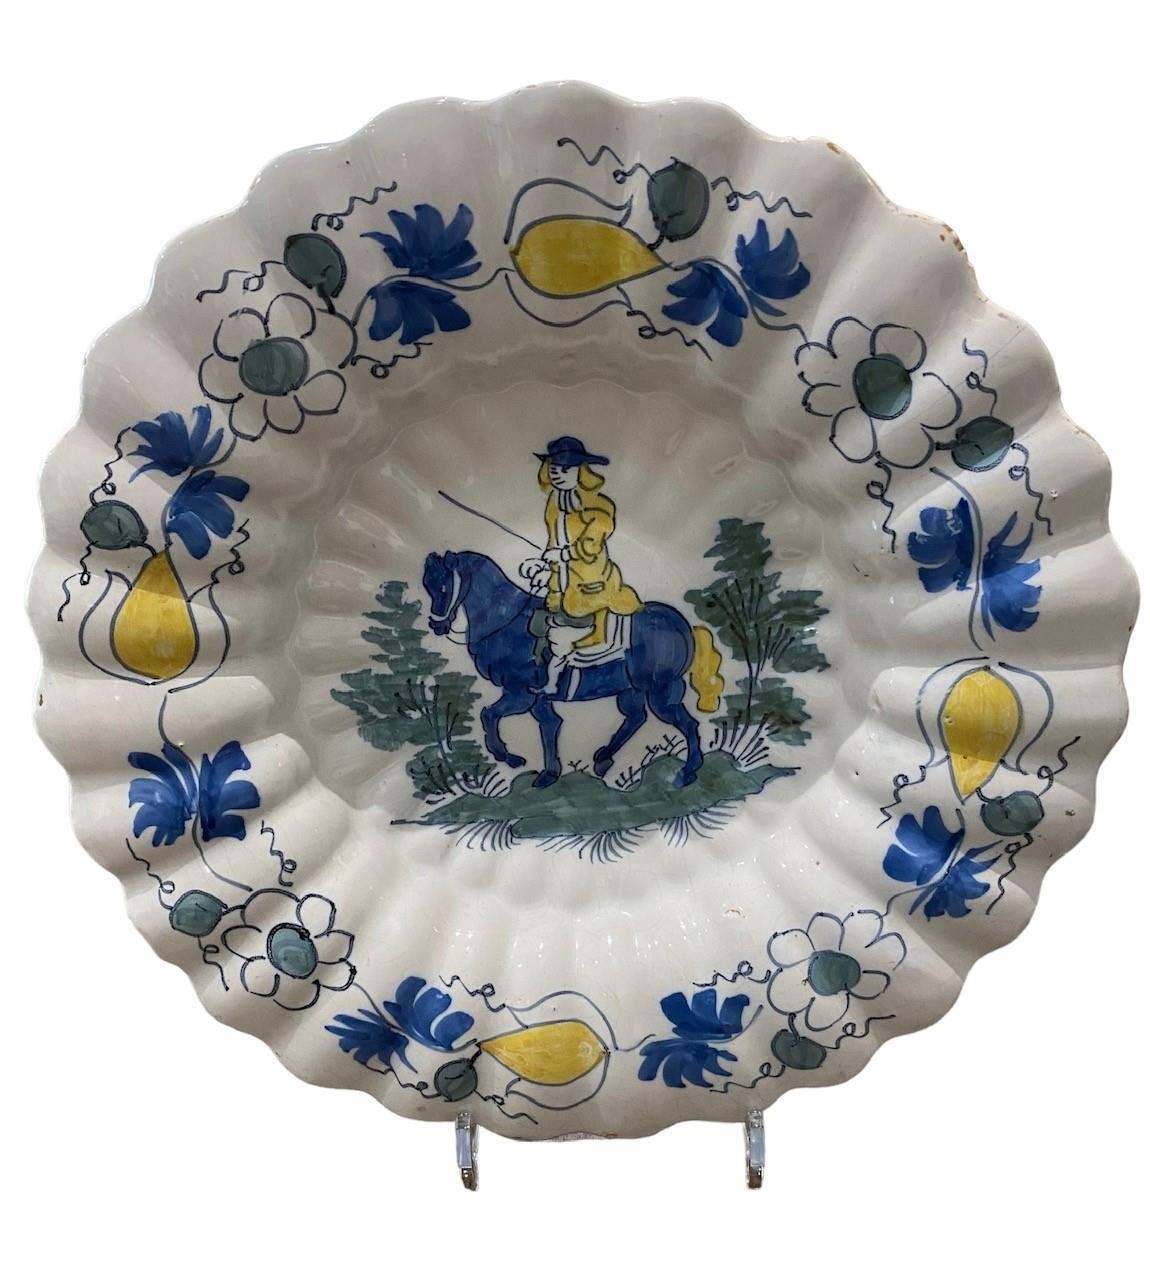 A LATE 17TH CENTURY DUTCH DELFTWARE LOBED CHARGER PLATE Blue, green and yellow with central